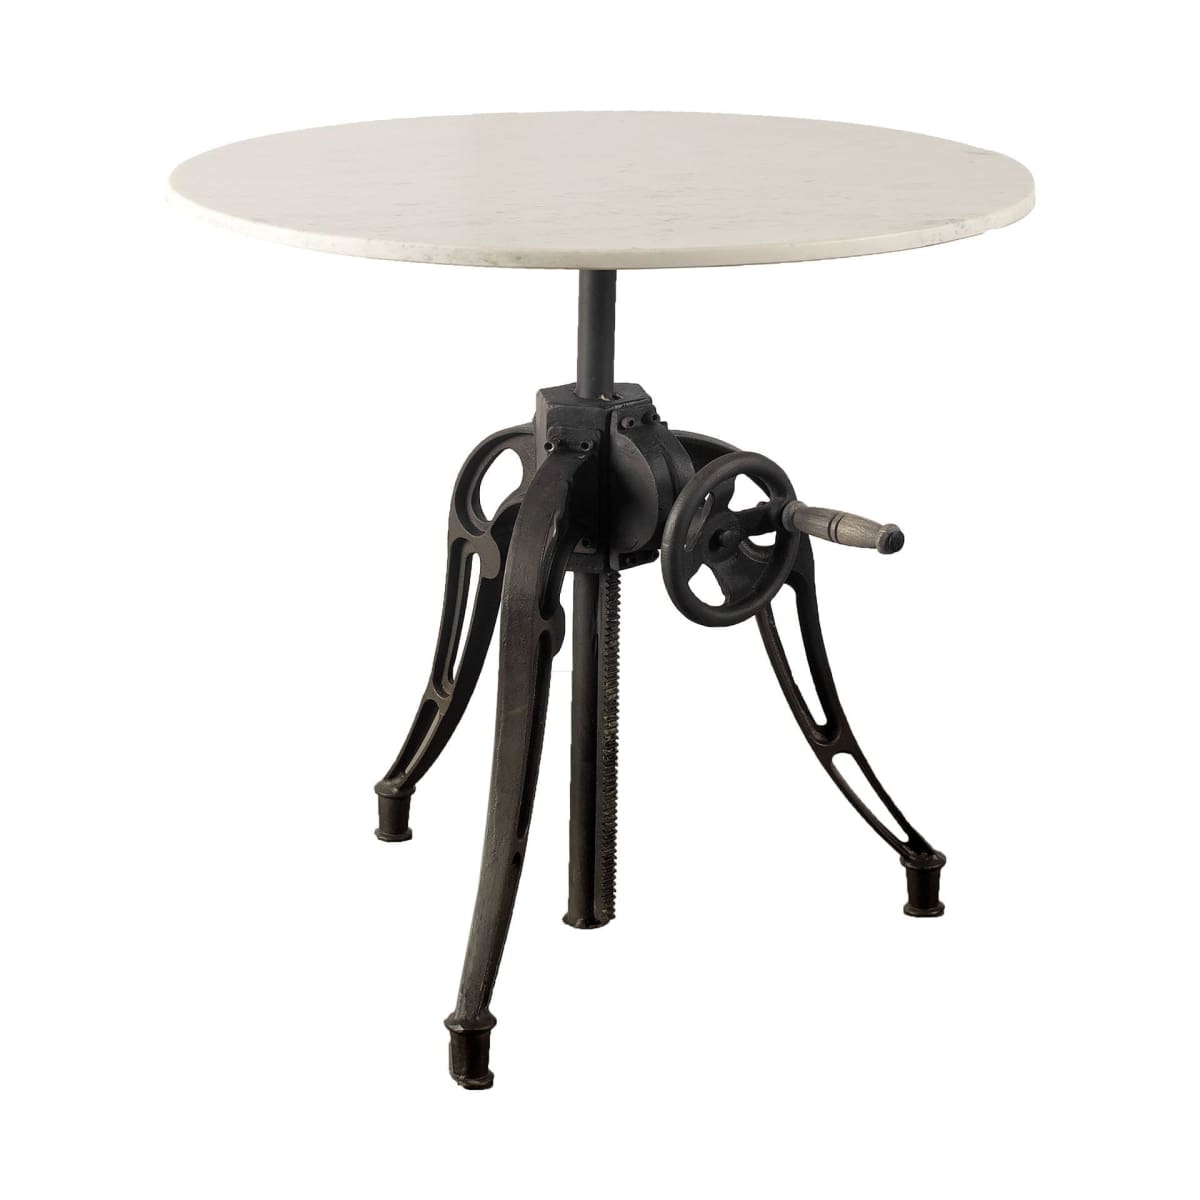 Emslie Dining Table White Marble | Black Metal - dining-table